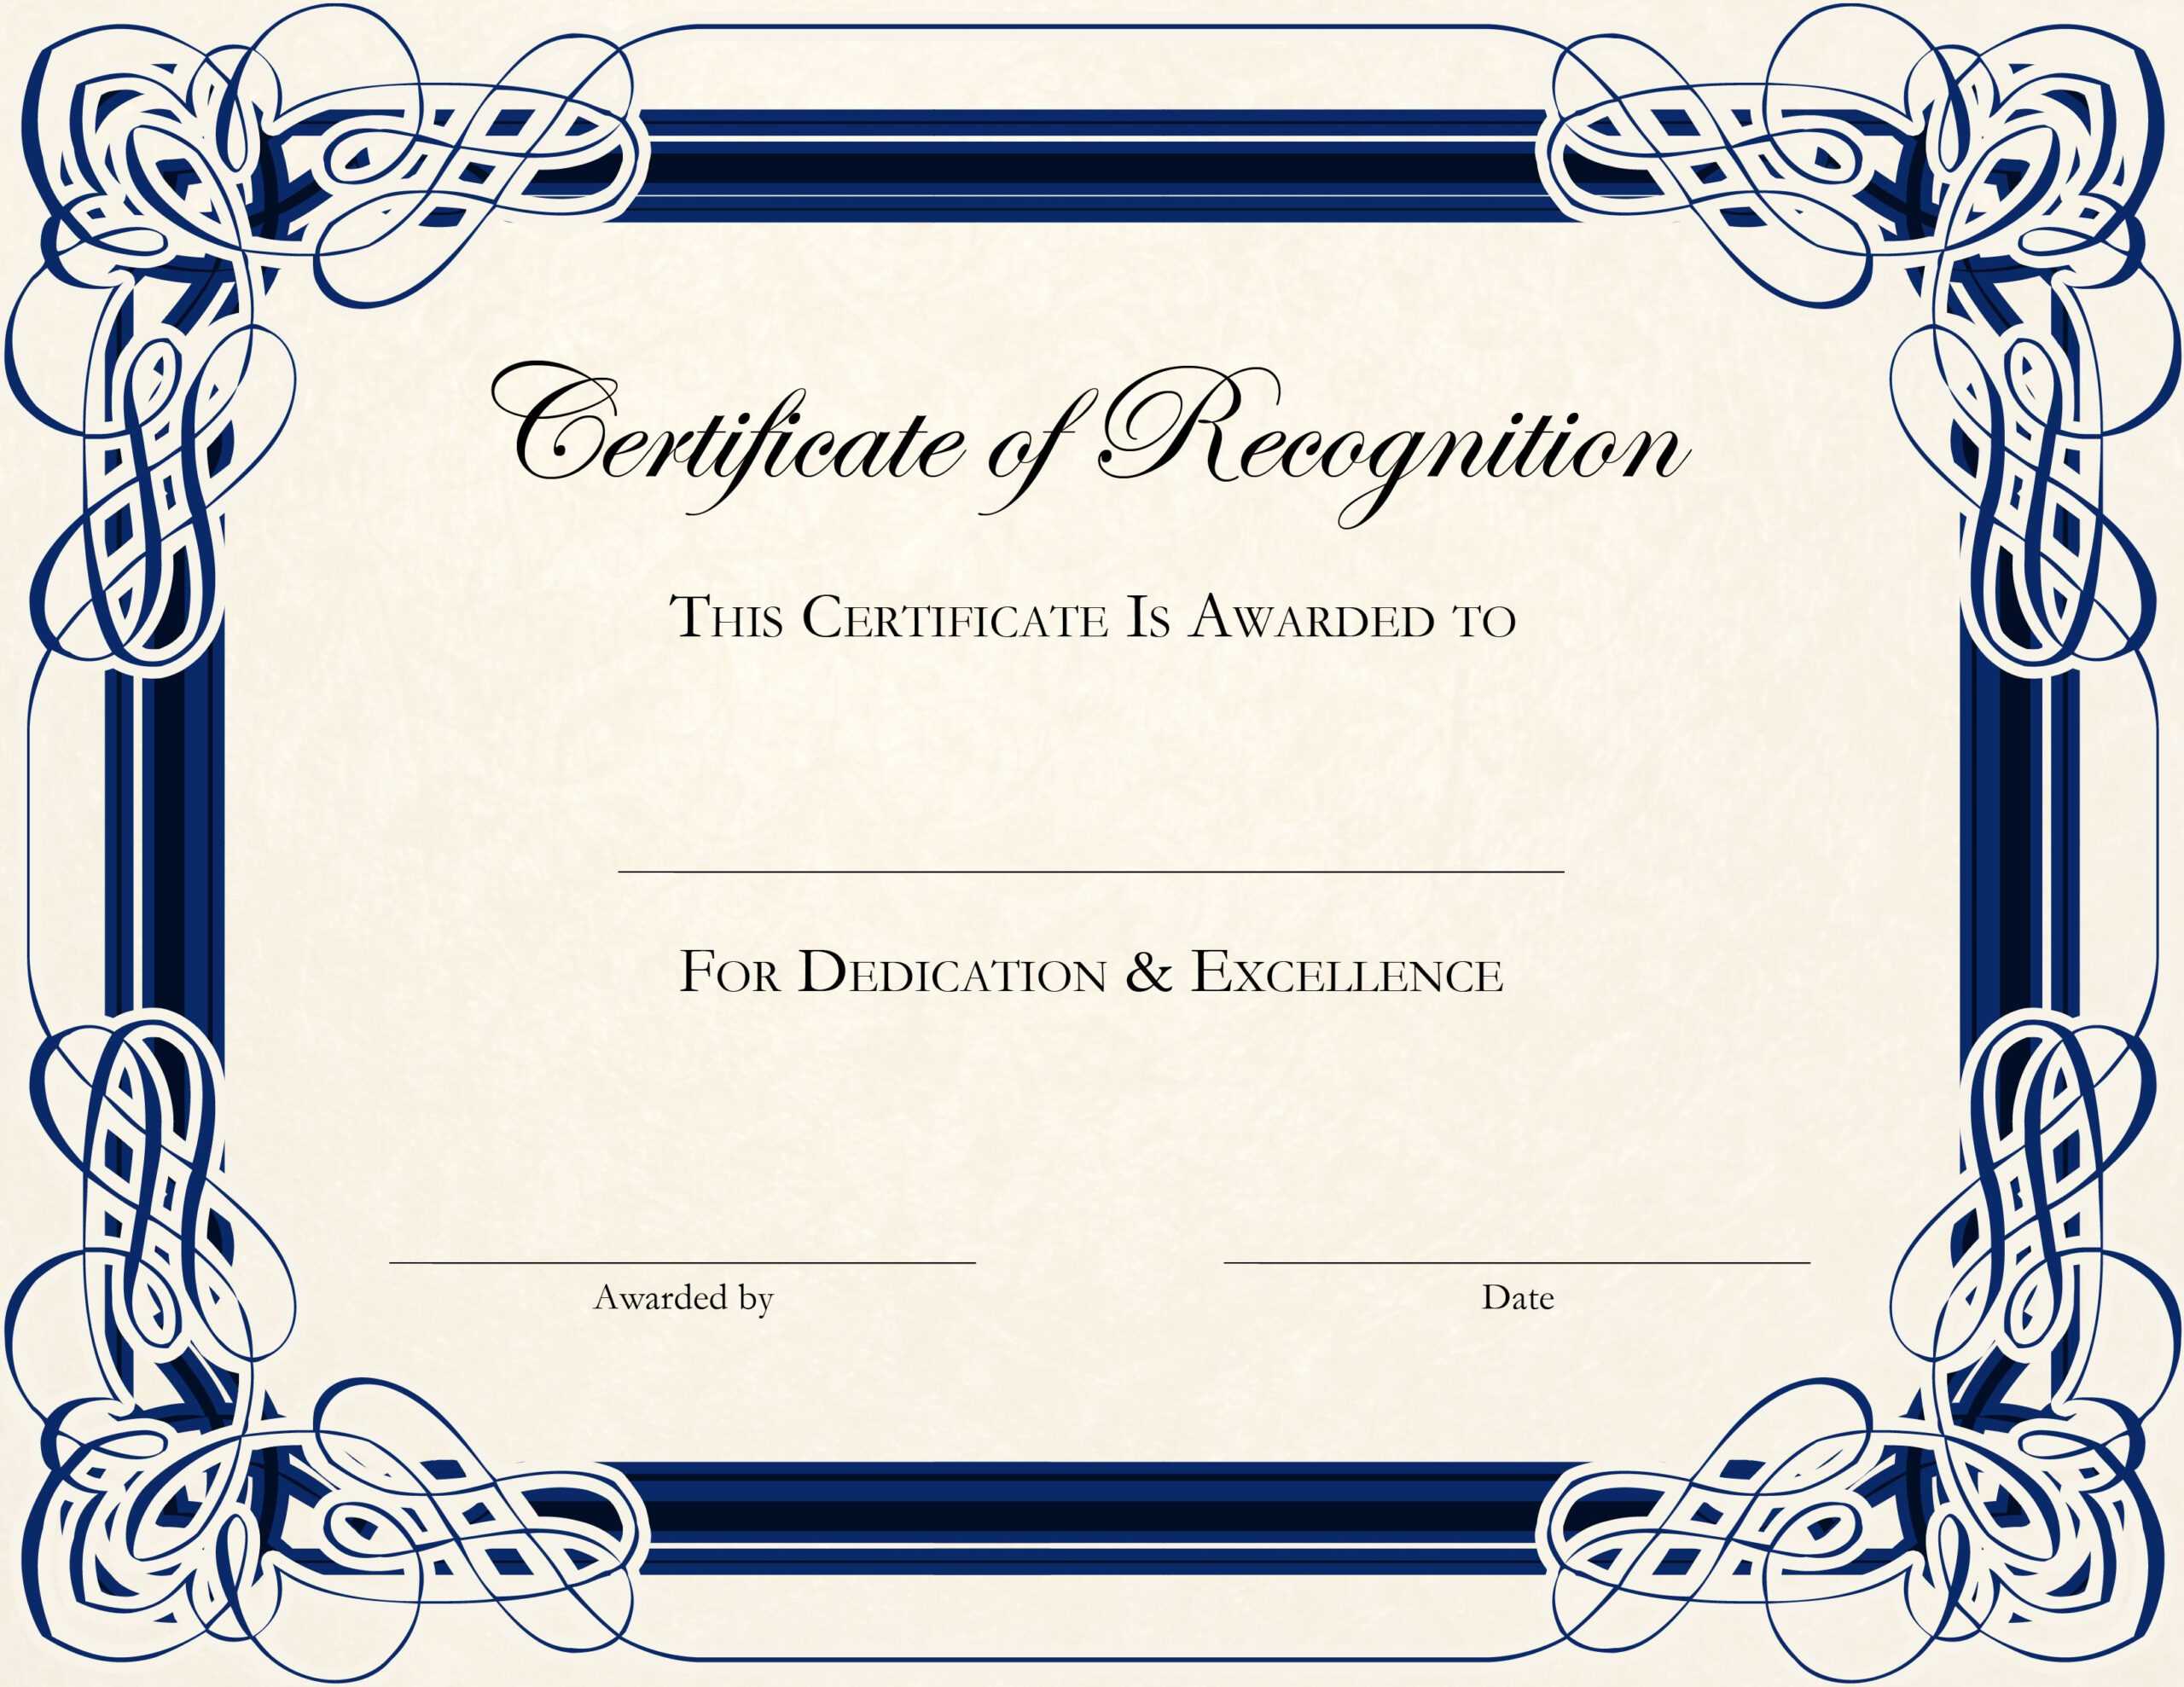 Certificate Template Designs Recognition Docs | Certificate Intended For Free Printable Certificate Border Templates